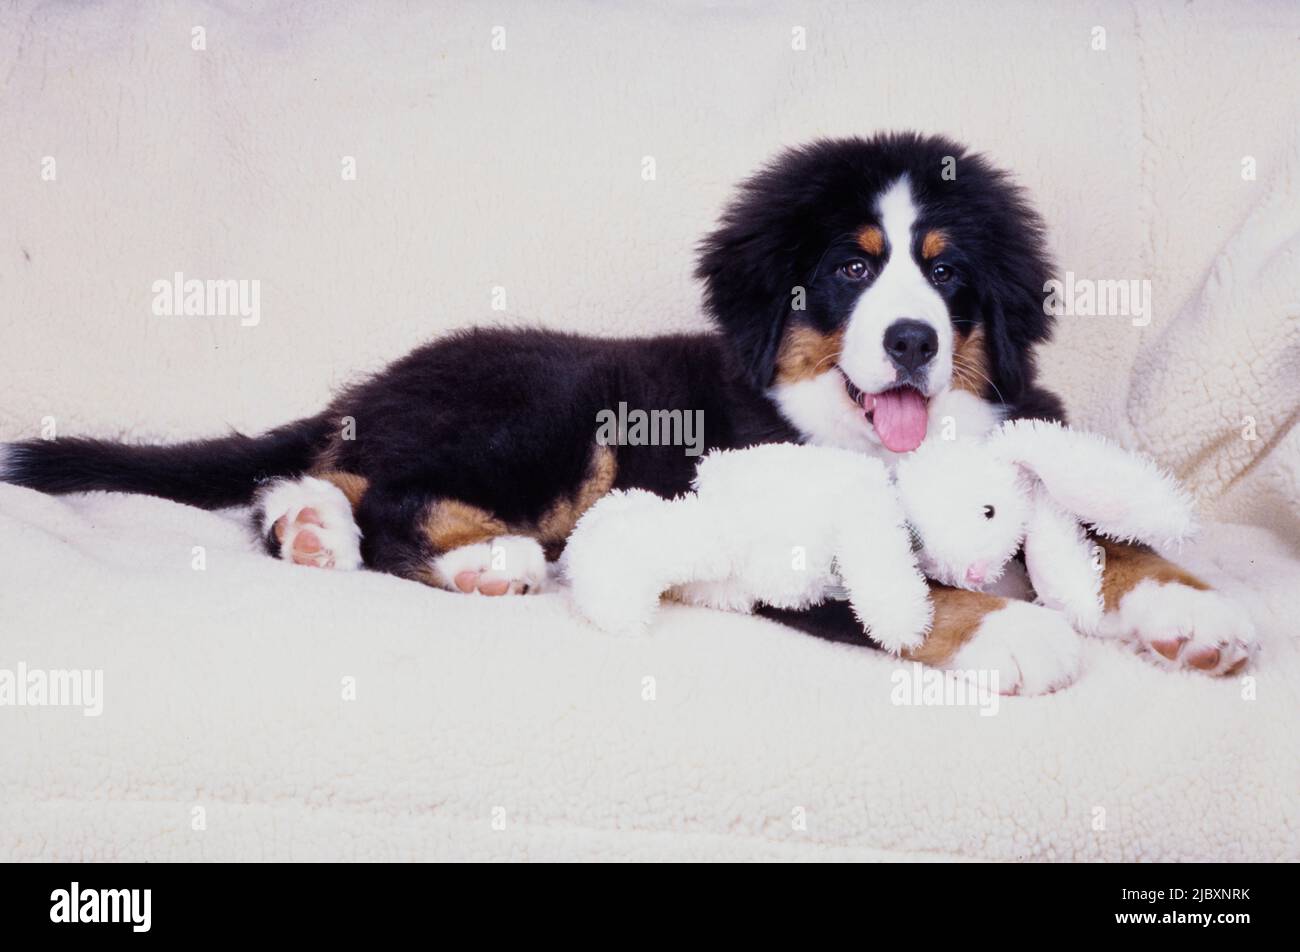 Bernese mountain dog puppy laying on white fabric with a stuffed toy bunny Stock Photo